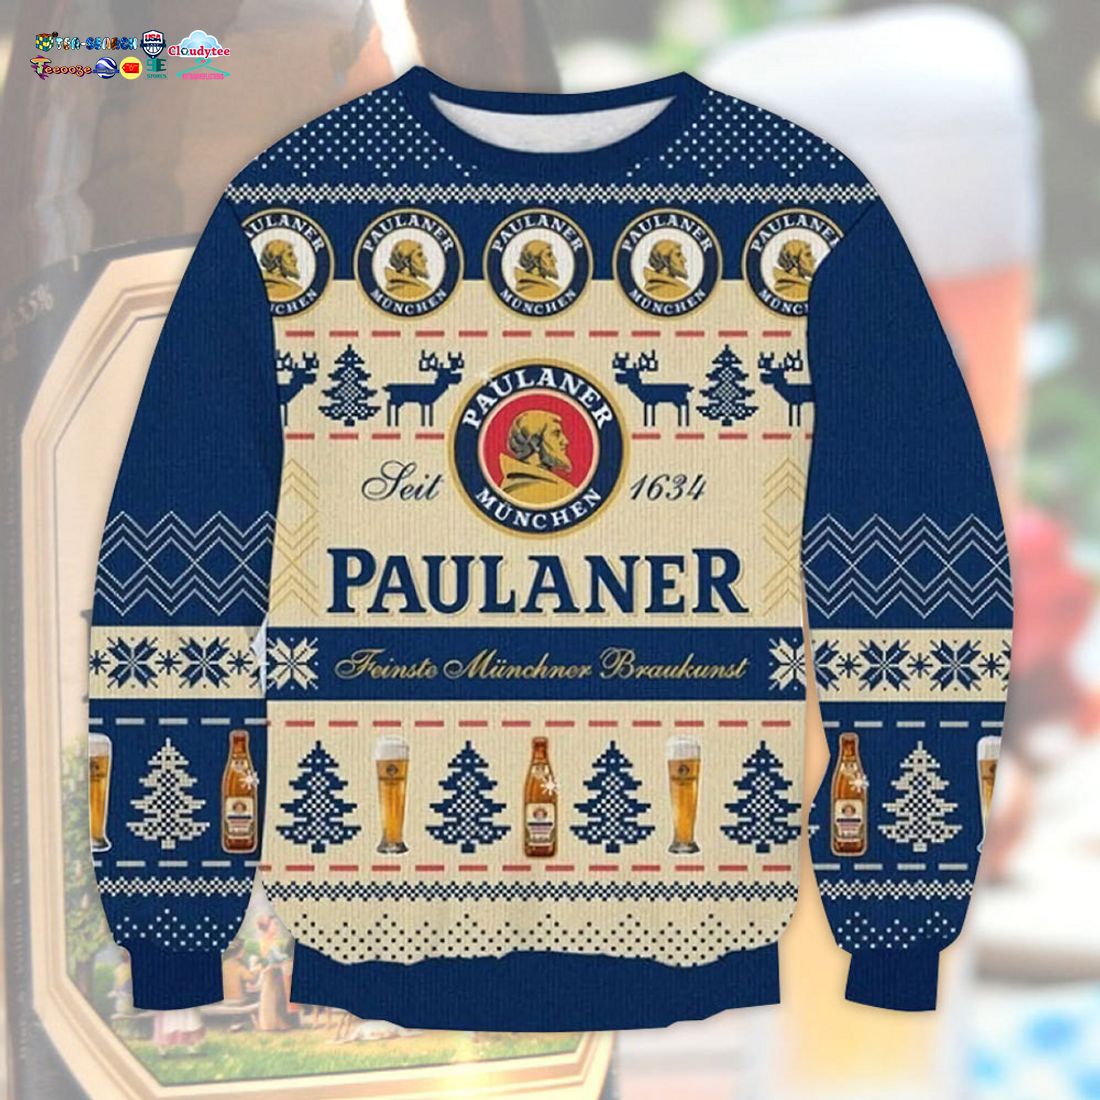 Paulaner Munchen Ugly Christmas Sweater - Such a charming picture.